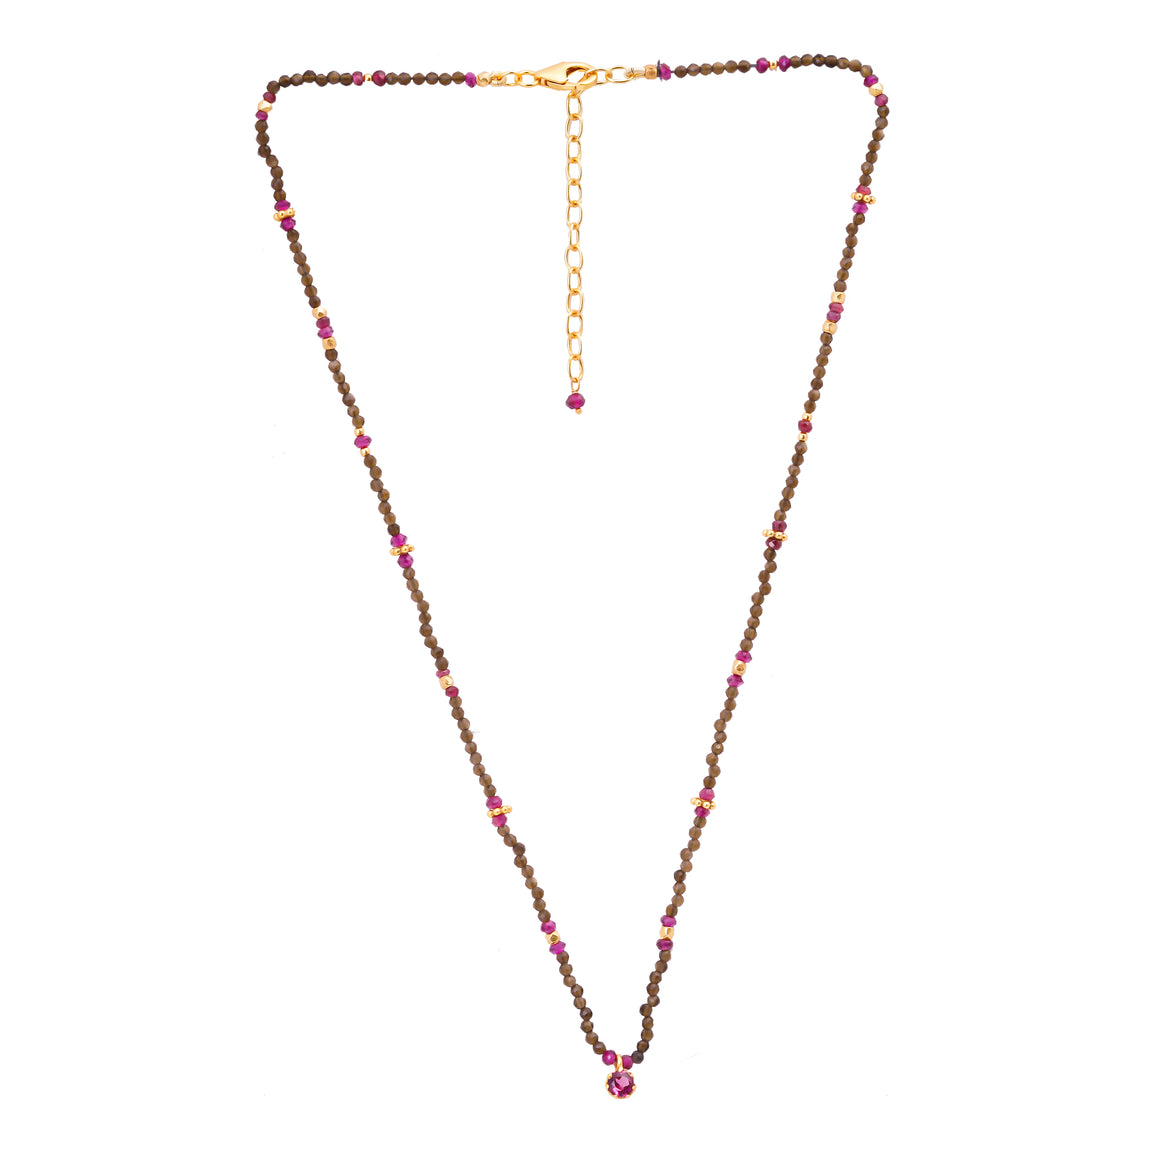 Garnet Agate Gold Beaded Necklace